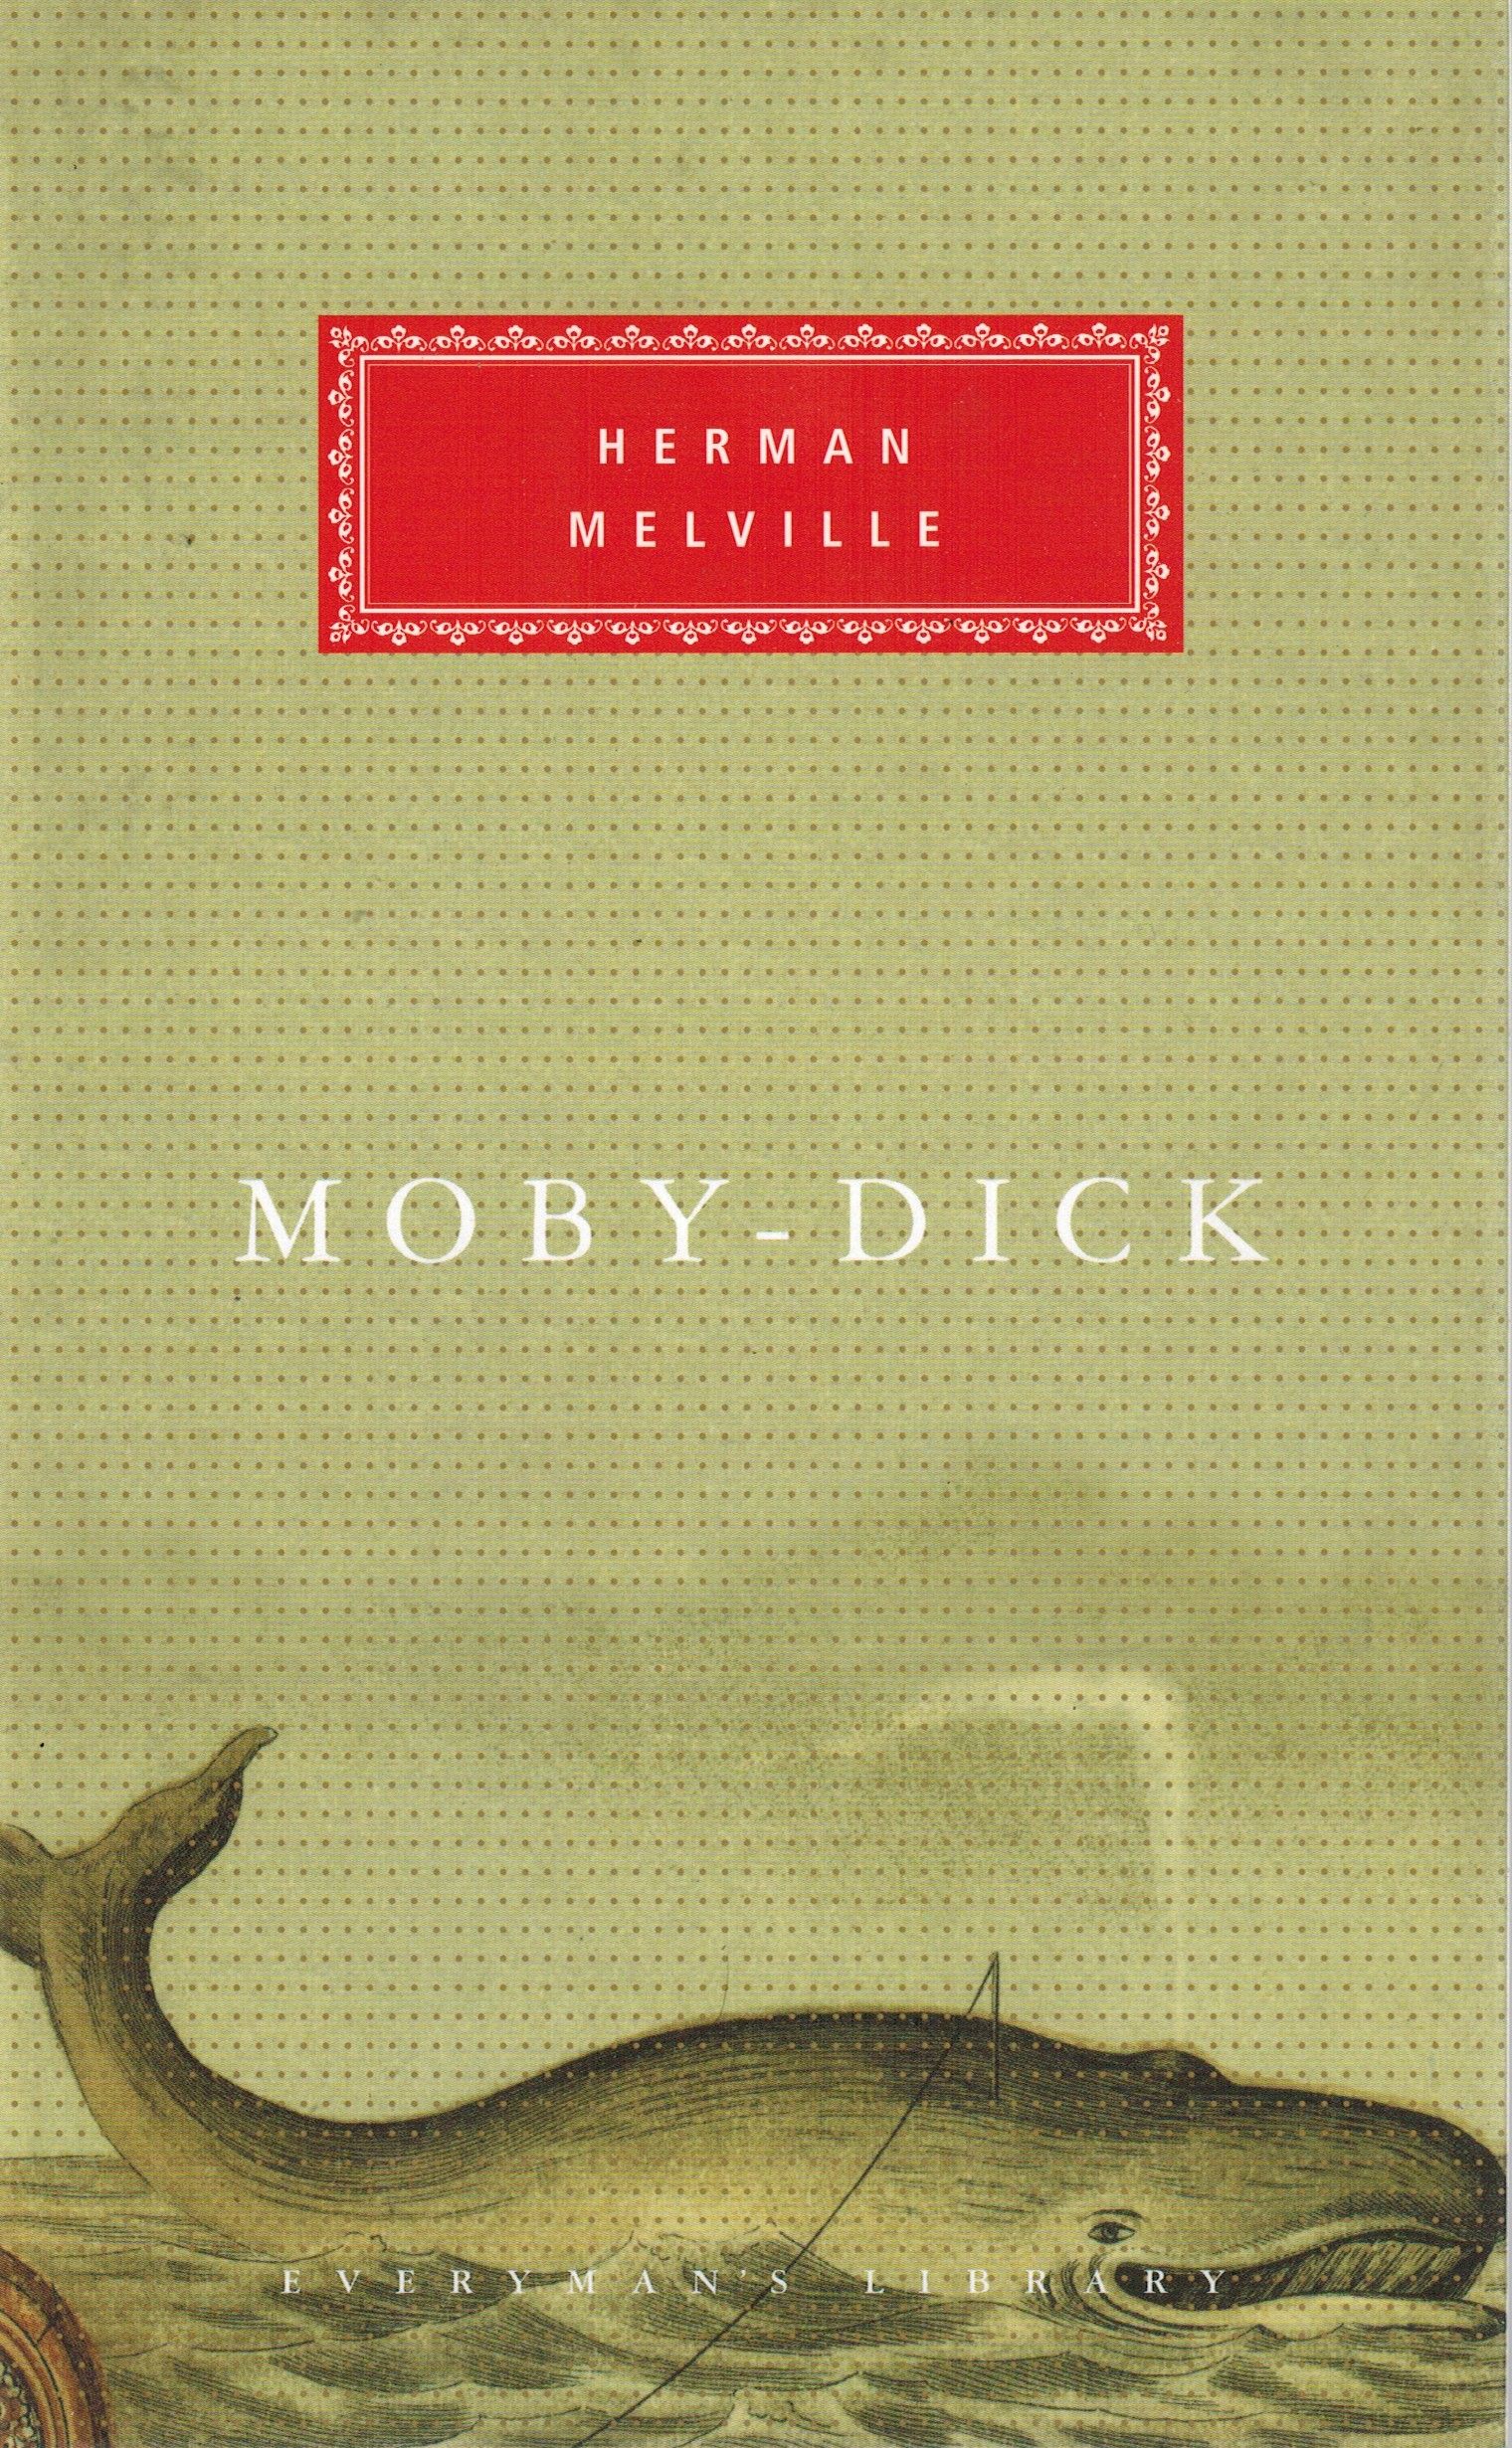 Moby dick everyman's library